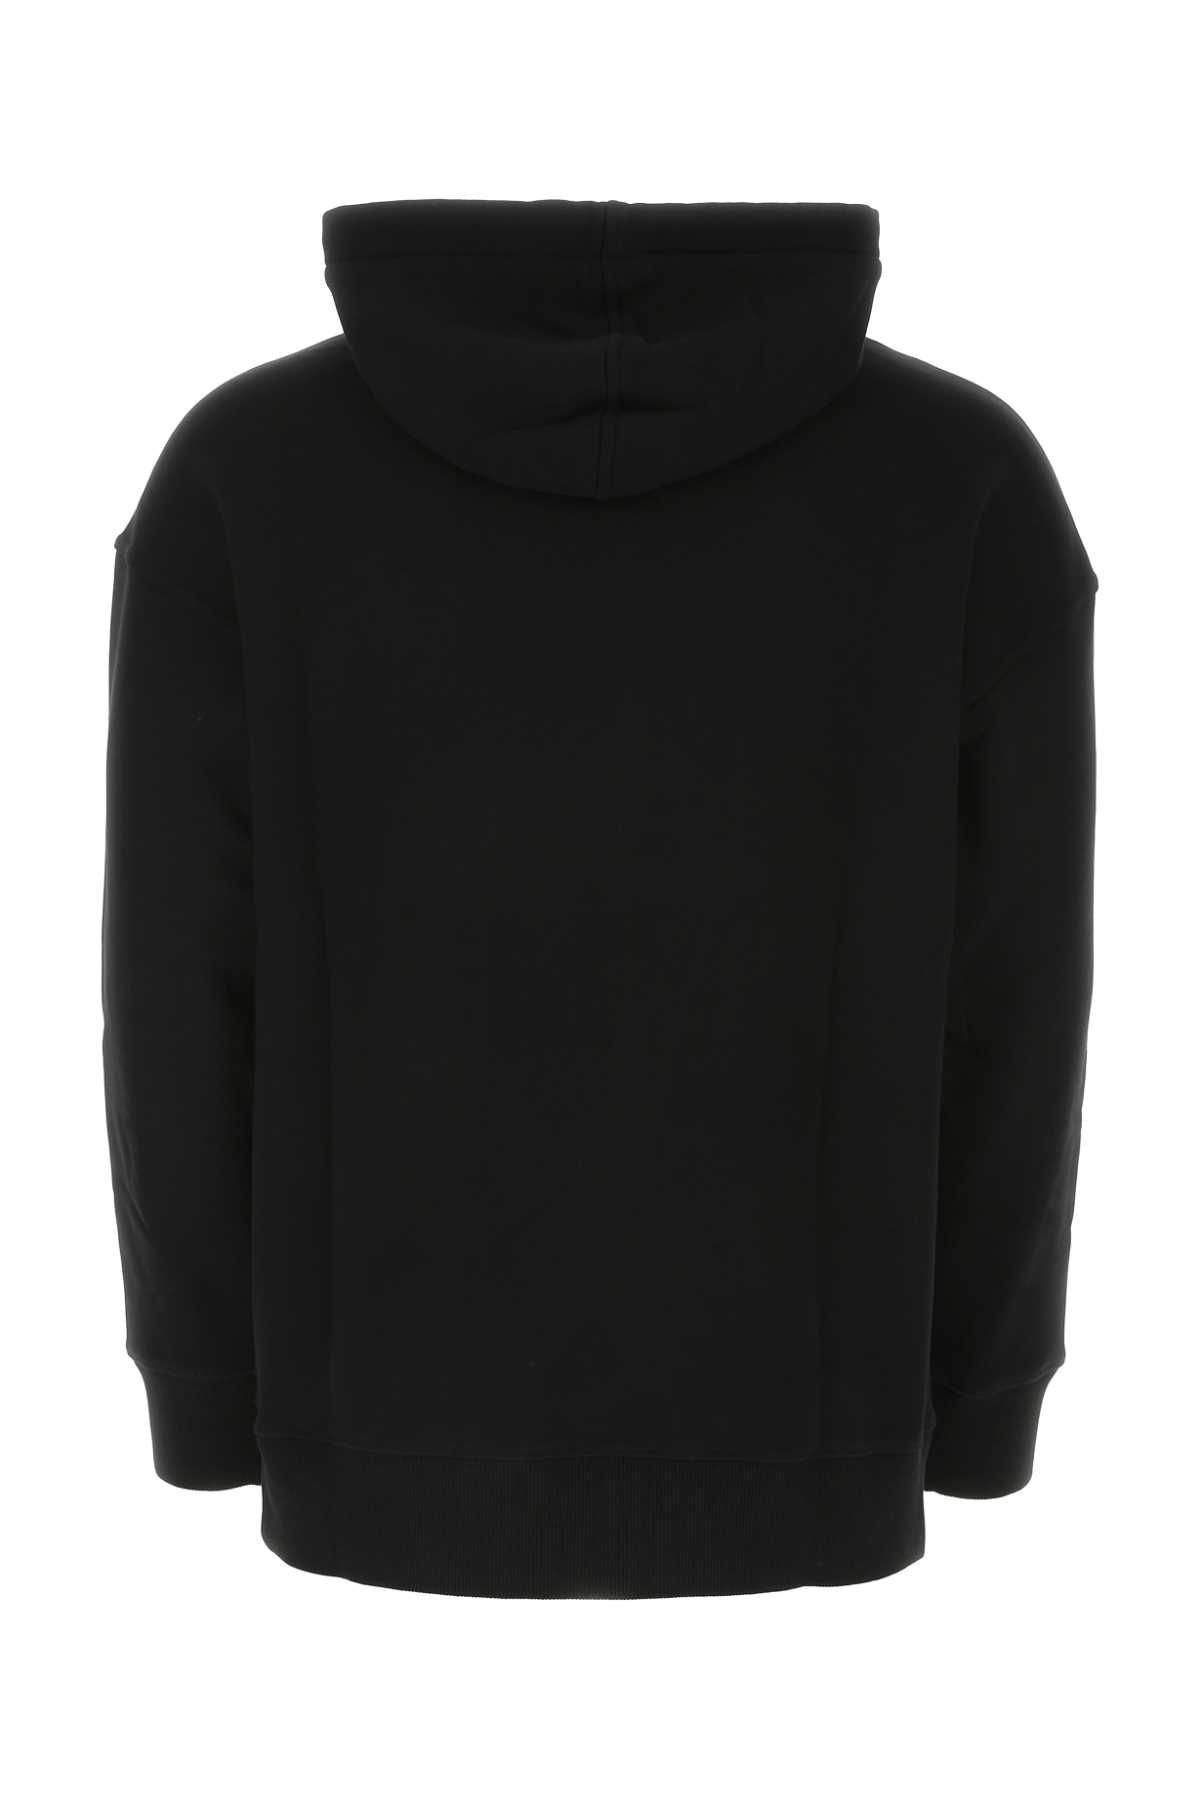 Givenchy Black Cotton Sweatshirt In 001